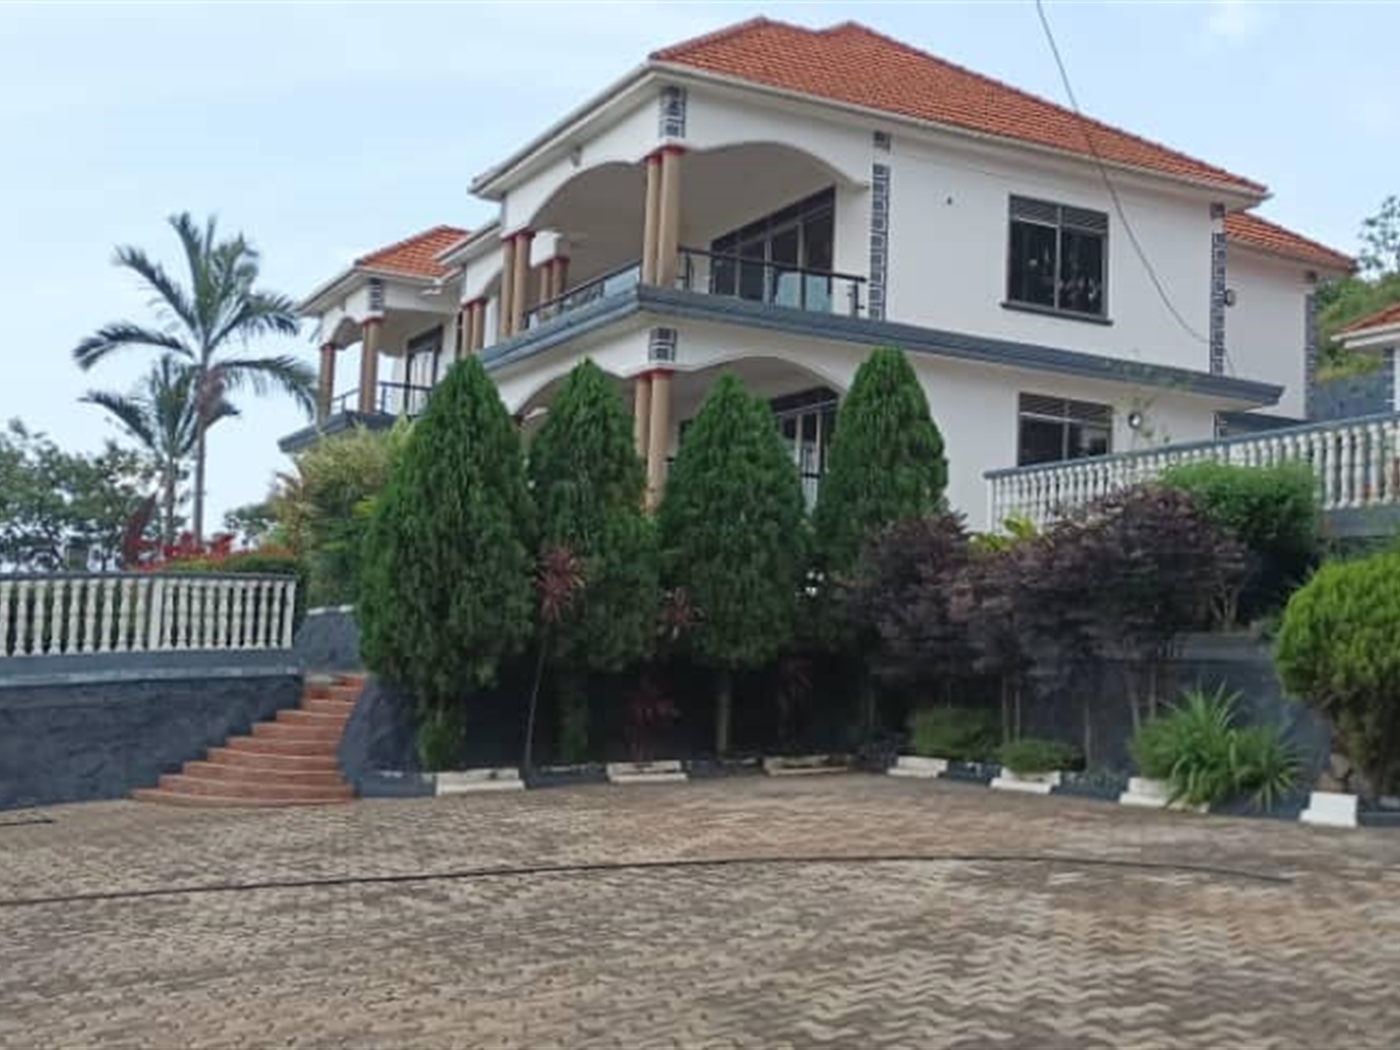 Apartment block for sale in Nsangi Wakiso